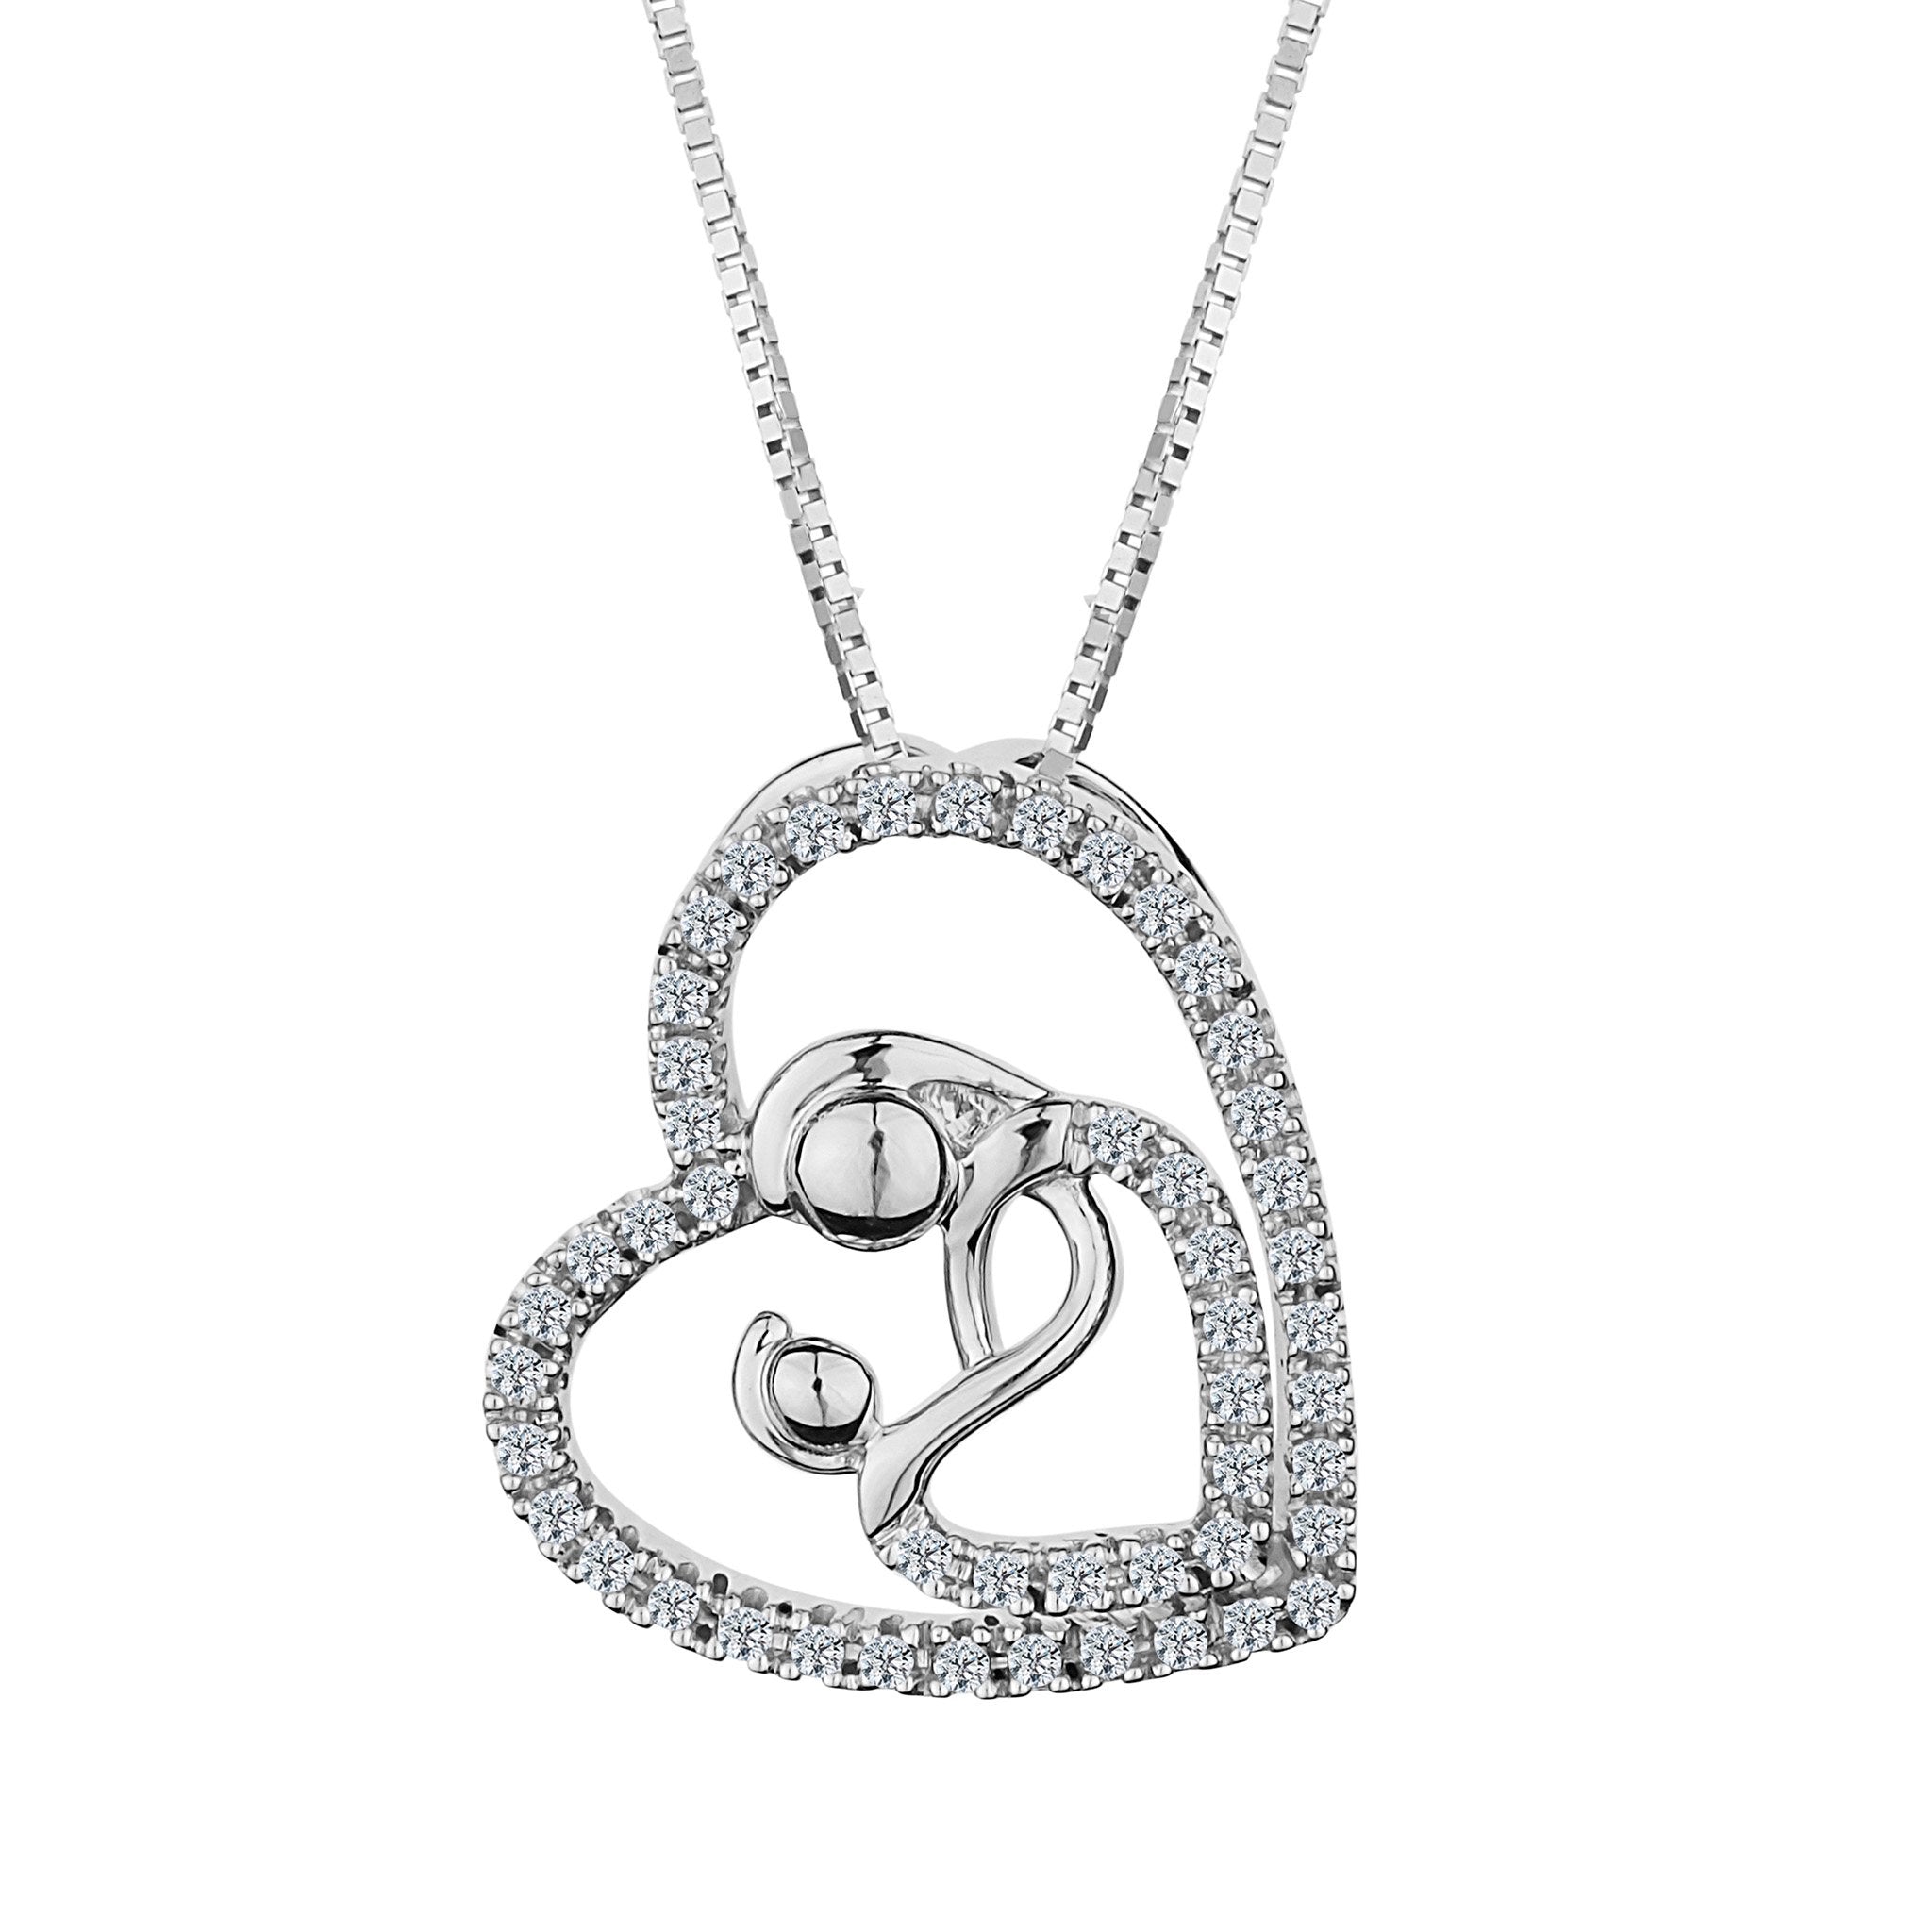 15 Carat Diamond Mother & Child Pendant,  10kt White Gold. Necklaces and Pendants. Griffin Jewellery Designs.